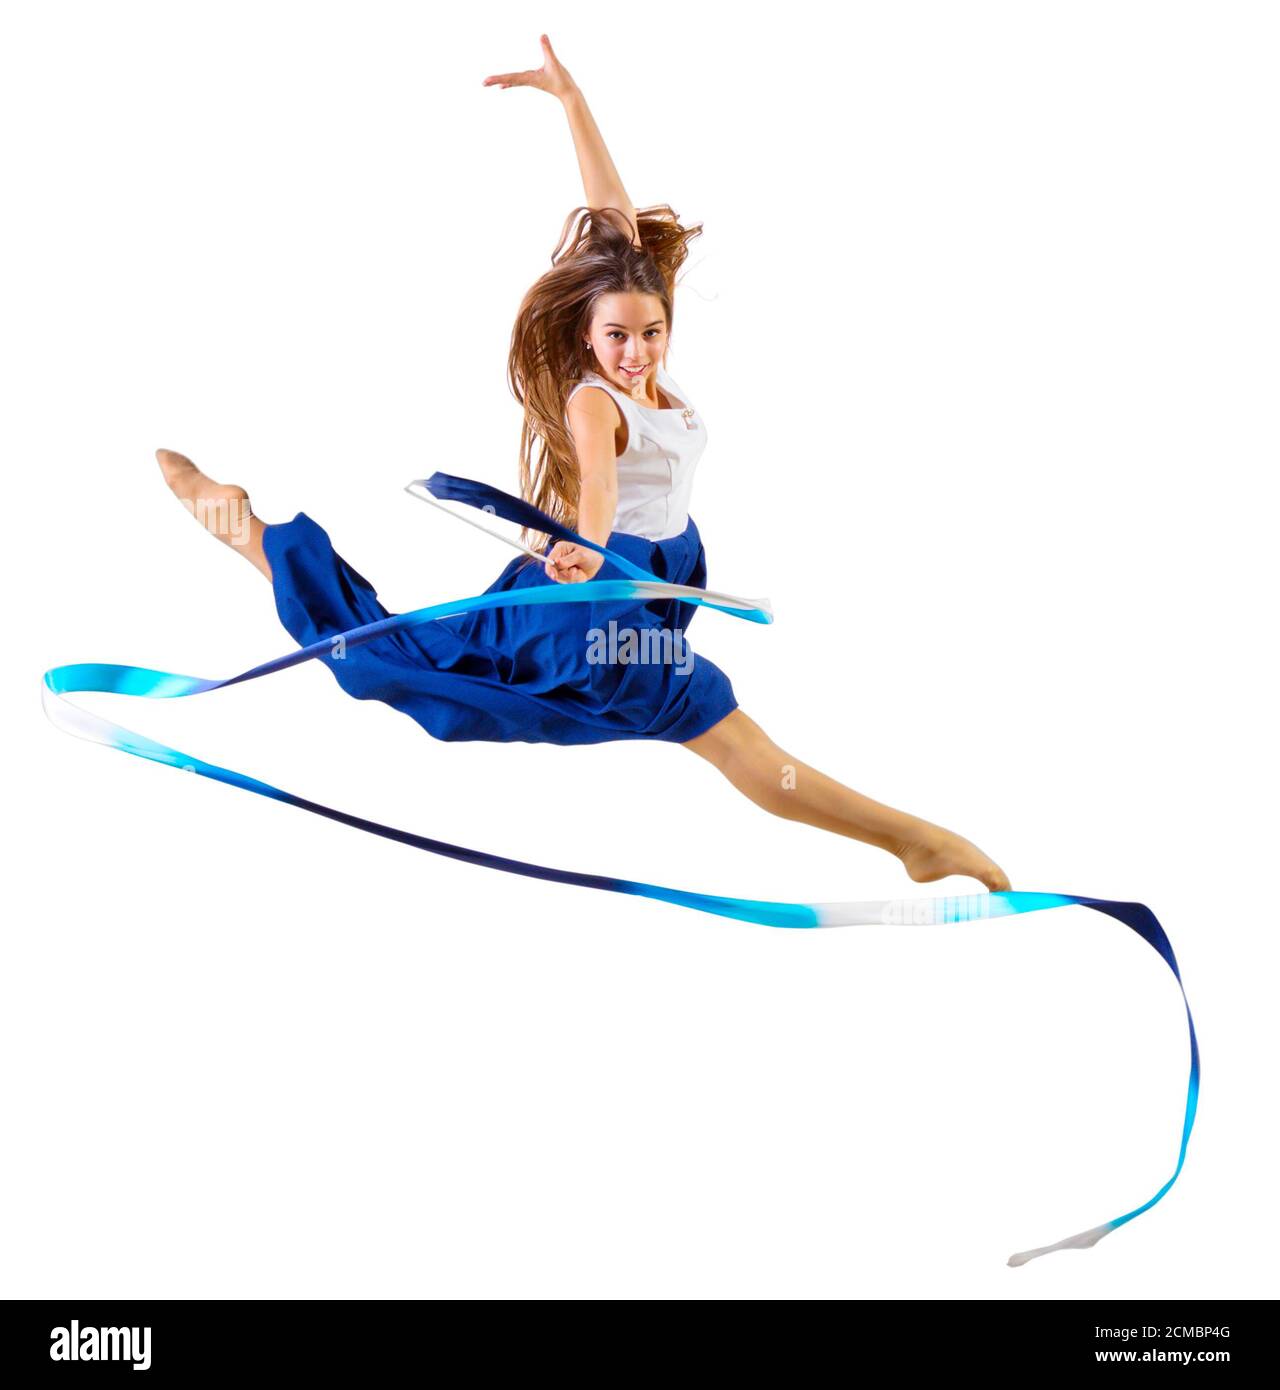 Young girl is engaged in art gymnastics isolated Stock Photo